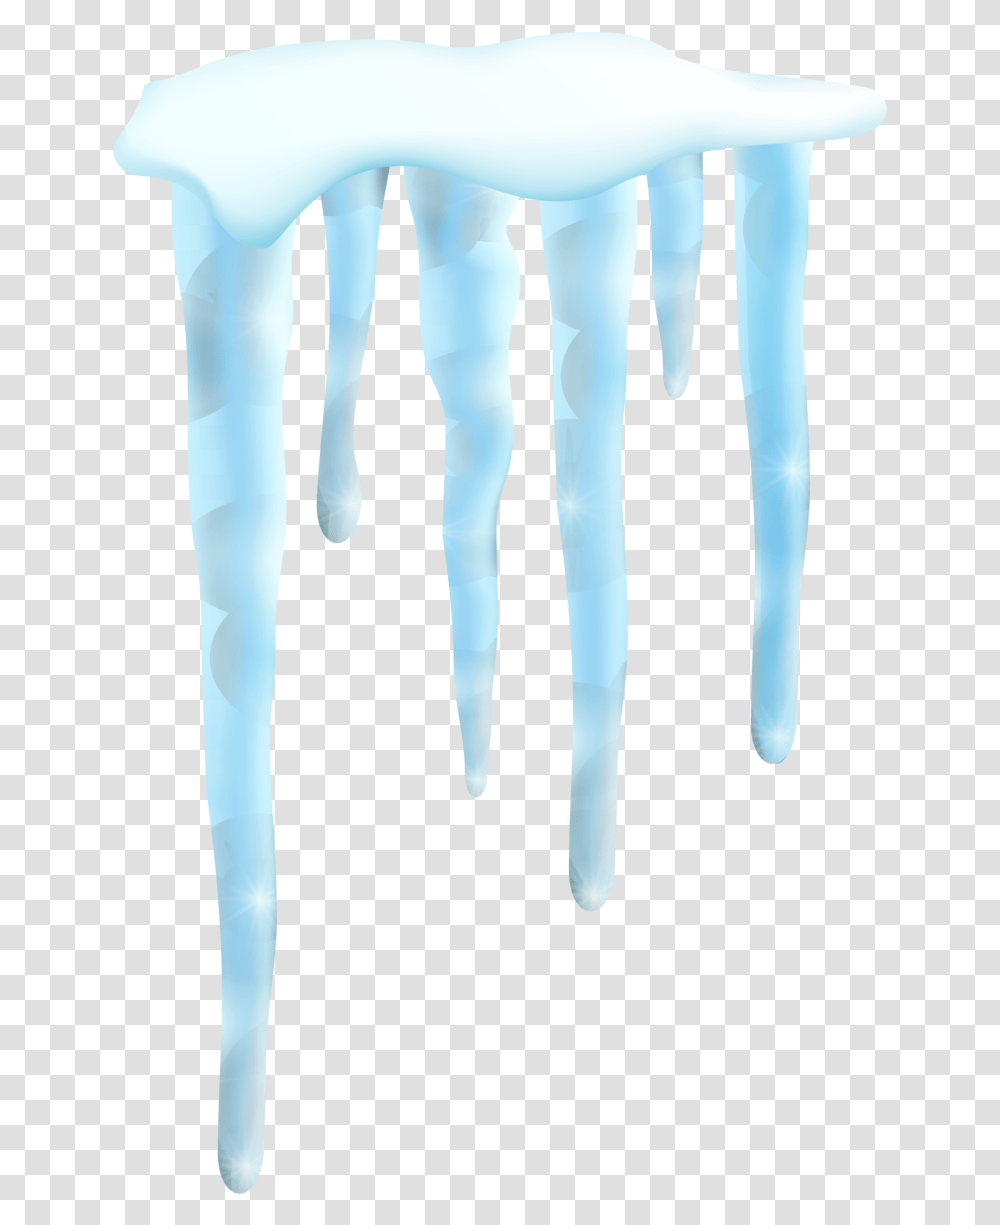 Icicles Image Icicle, Nature, Outdoors, Ice, Snow Transparent Png